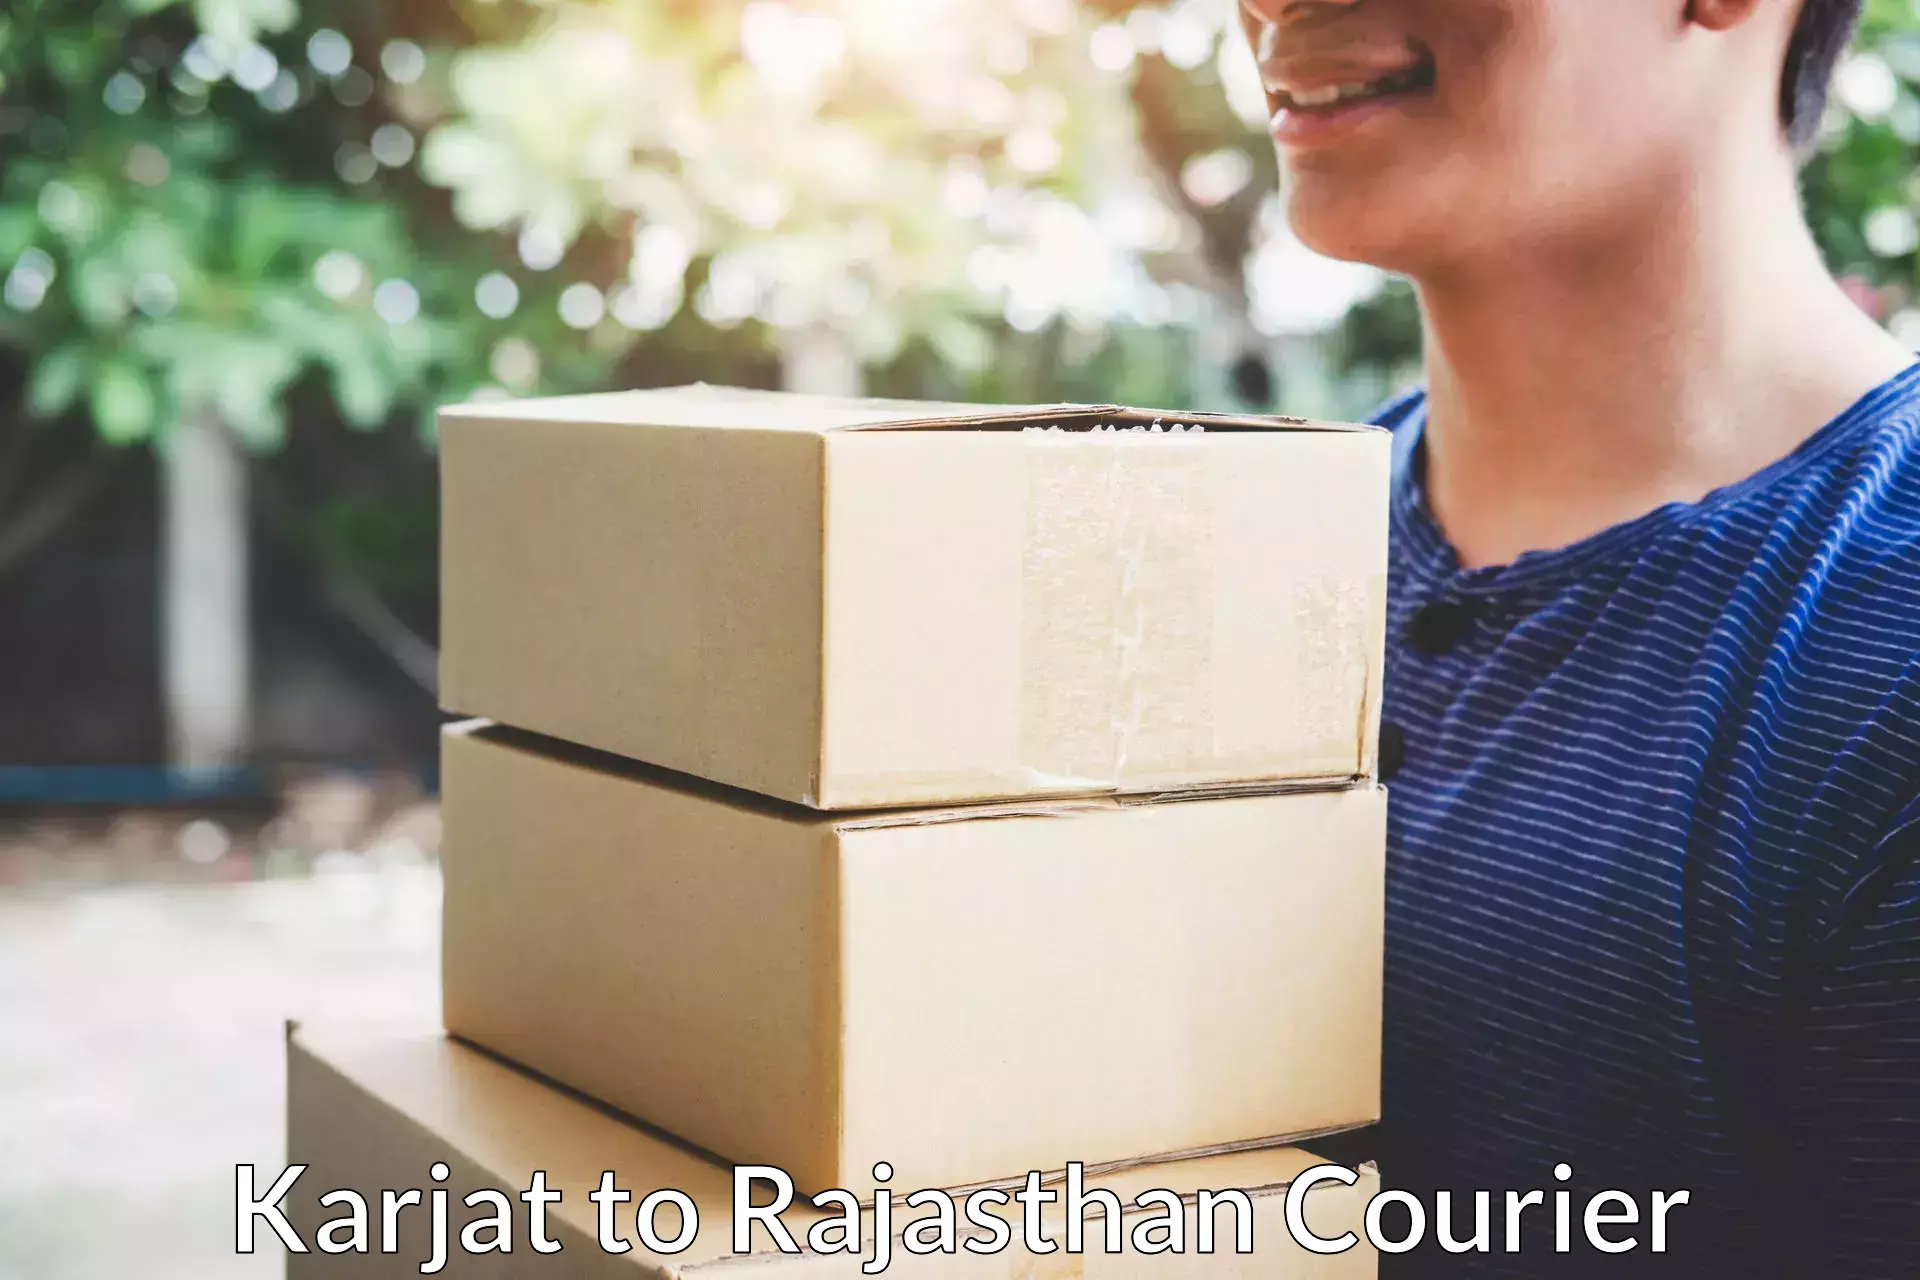 Reliable relocation services Karjat to Rajasthan